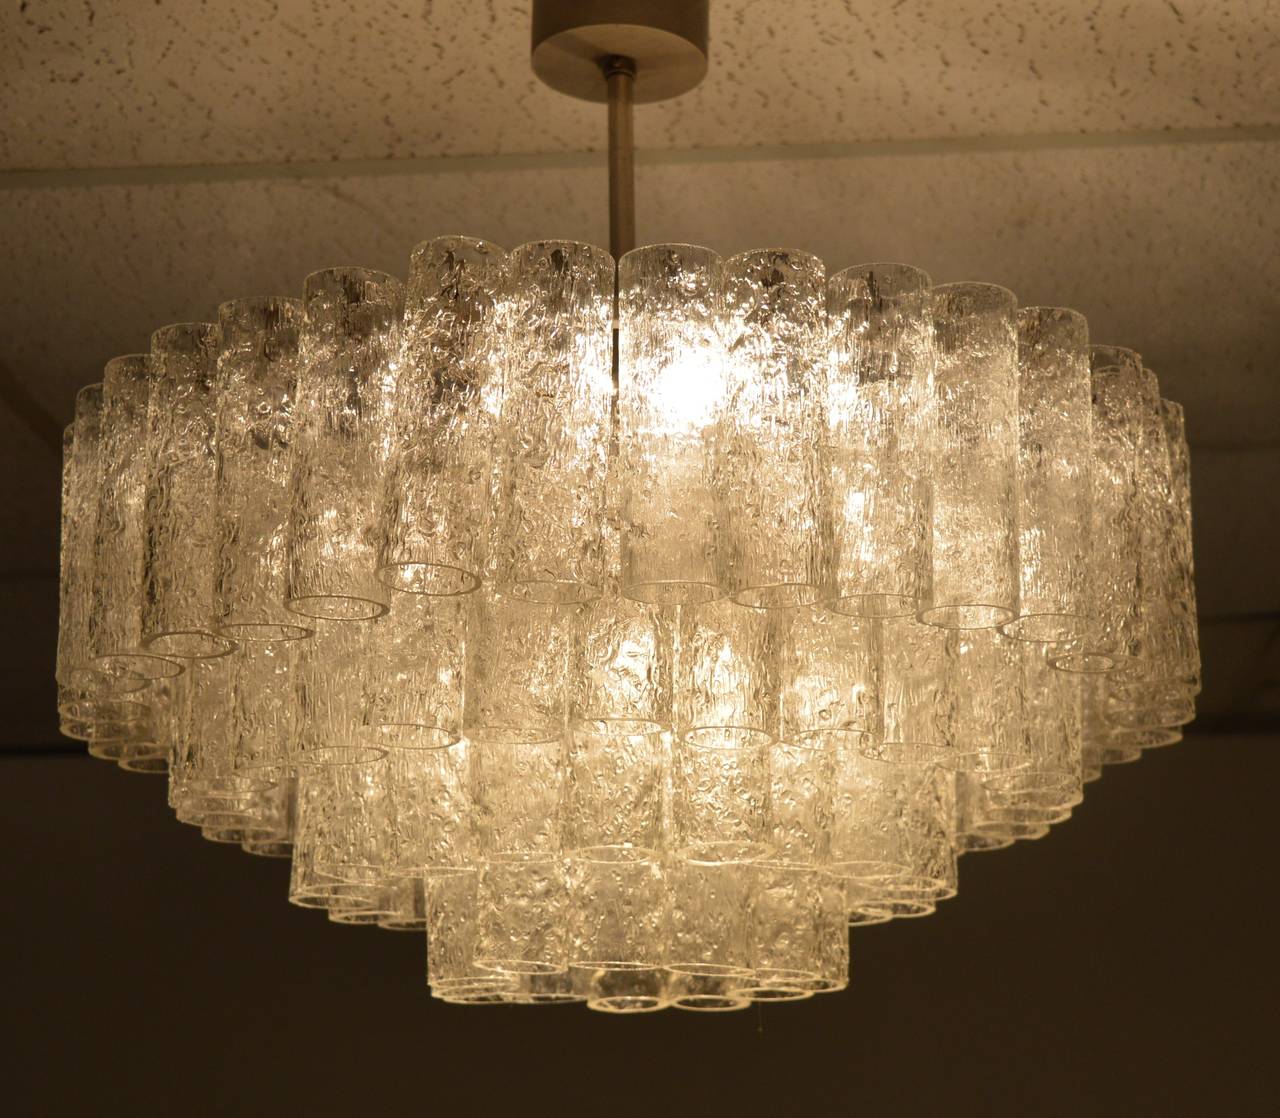 Impressive chandelier by Doria in four layers.